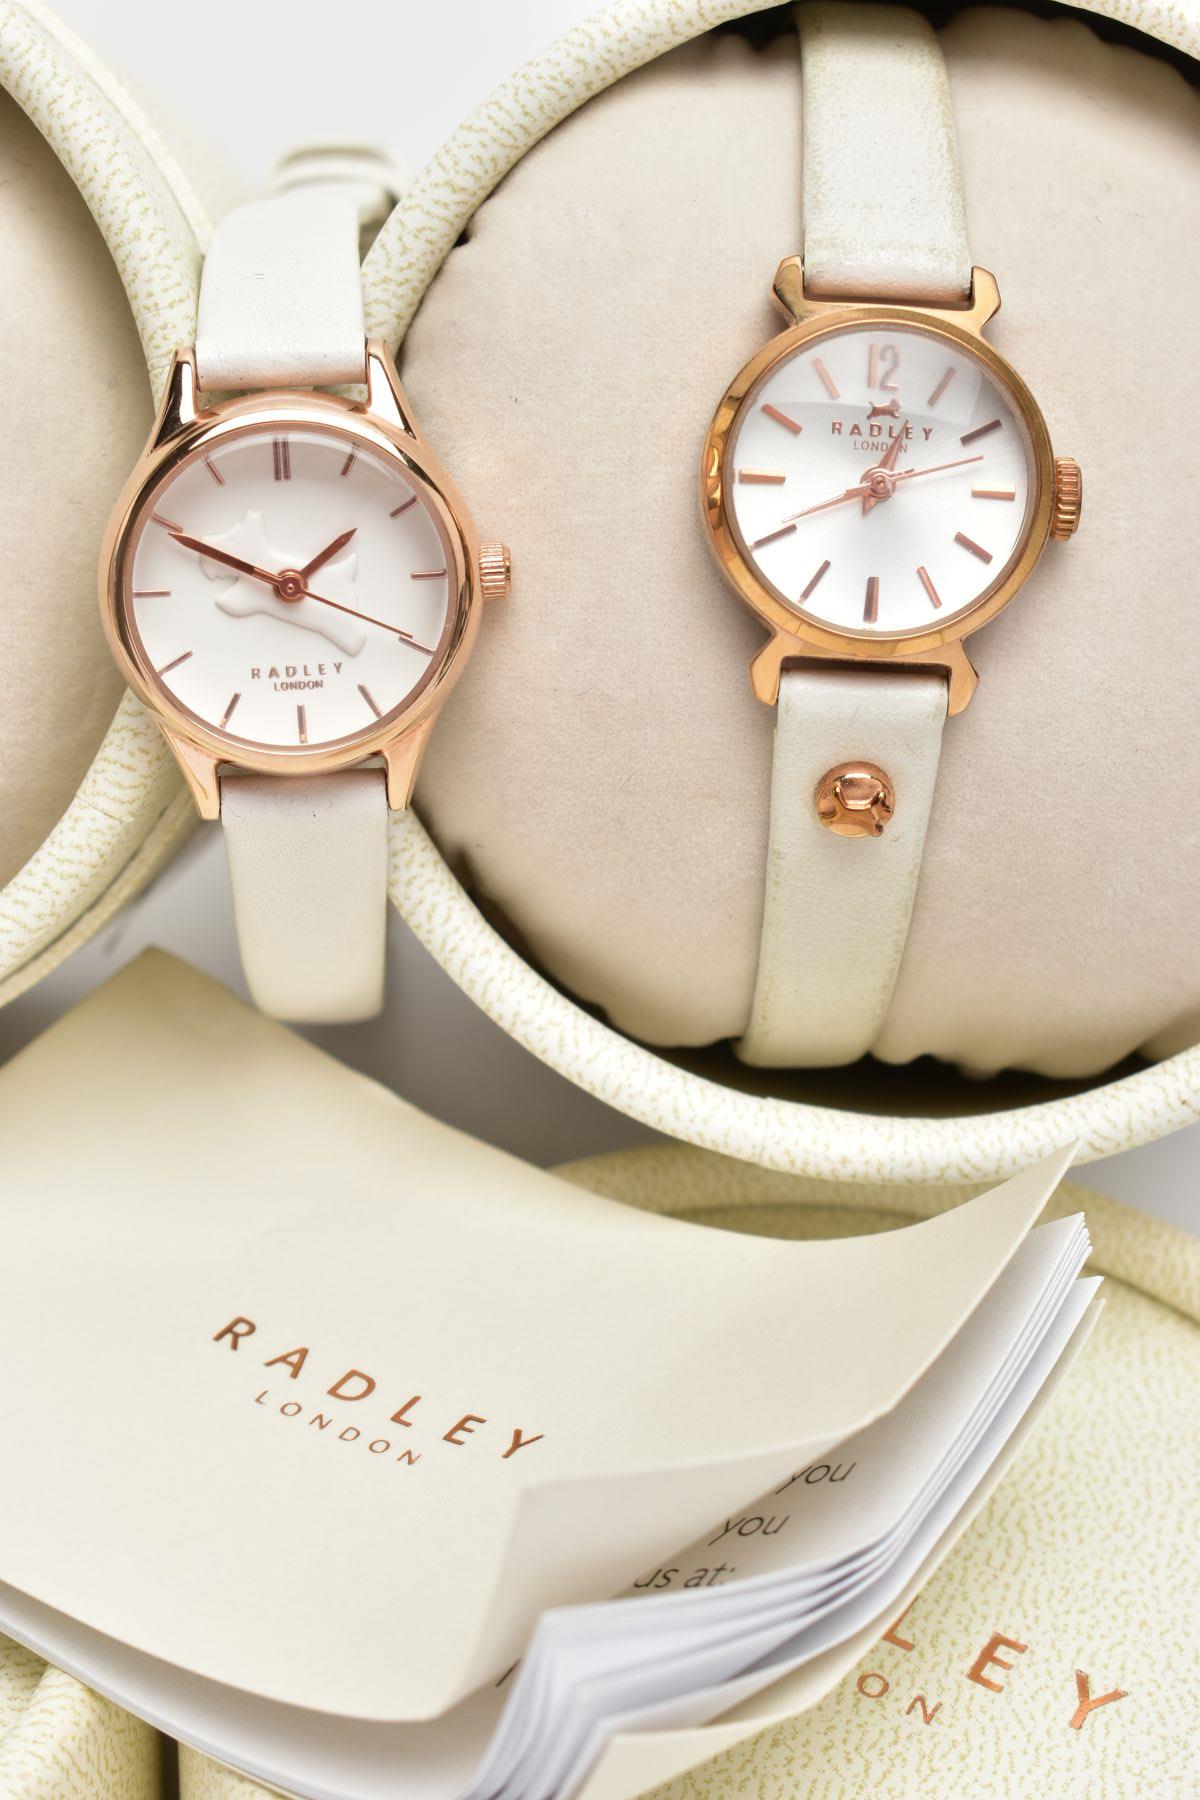 A SELECTION OF RADLEY WATCHES, one white and rose gold coloured watch, white watch face featuring - Image 2 of 4